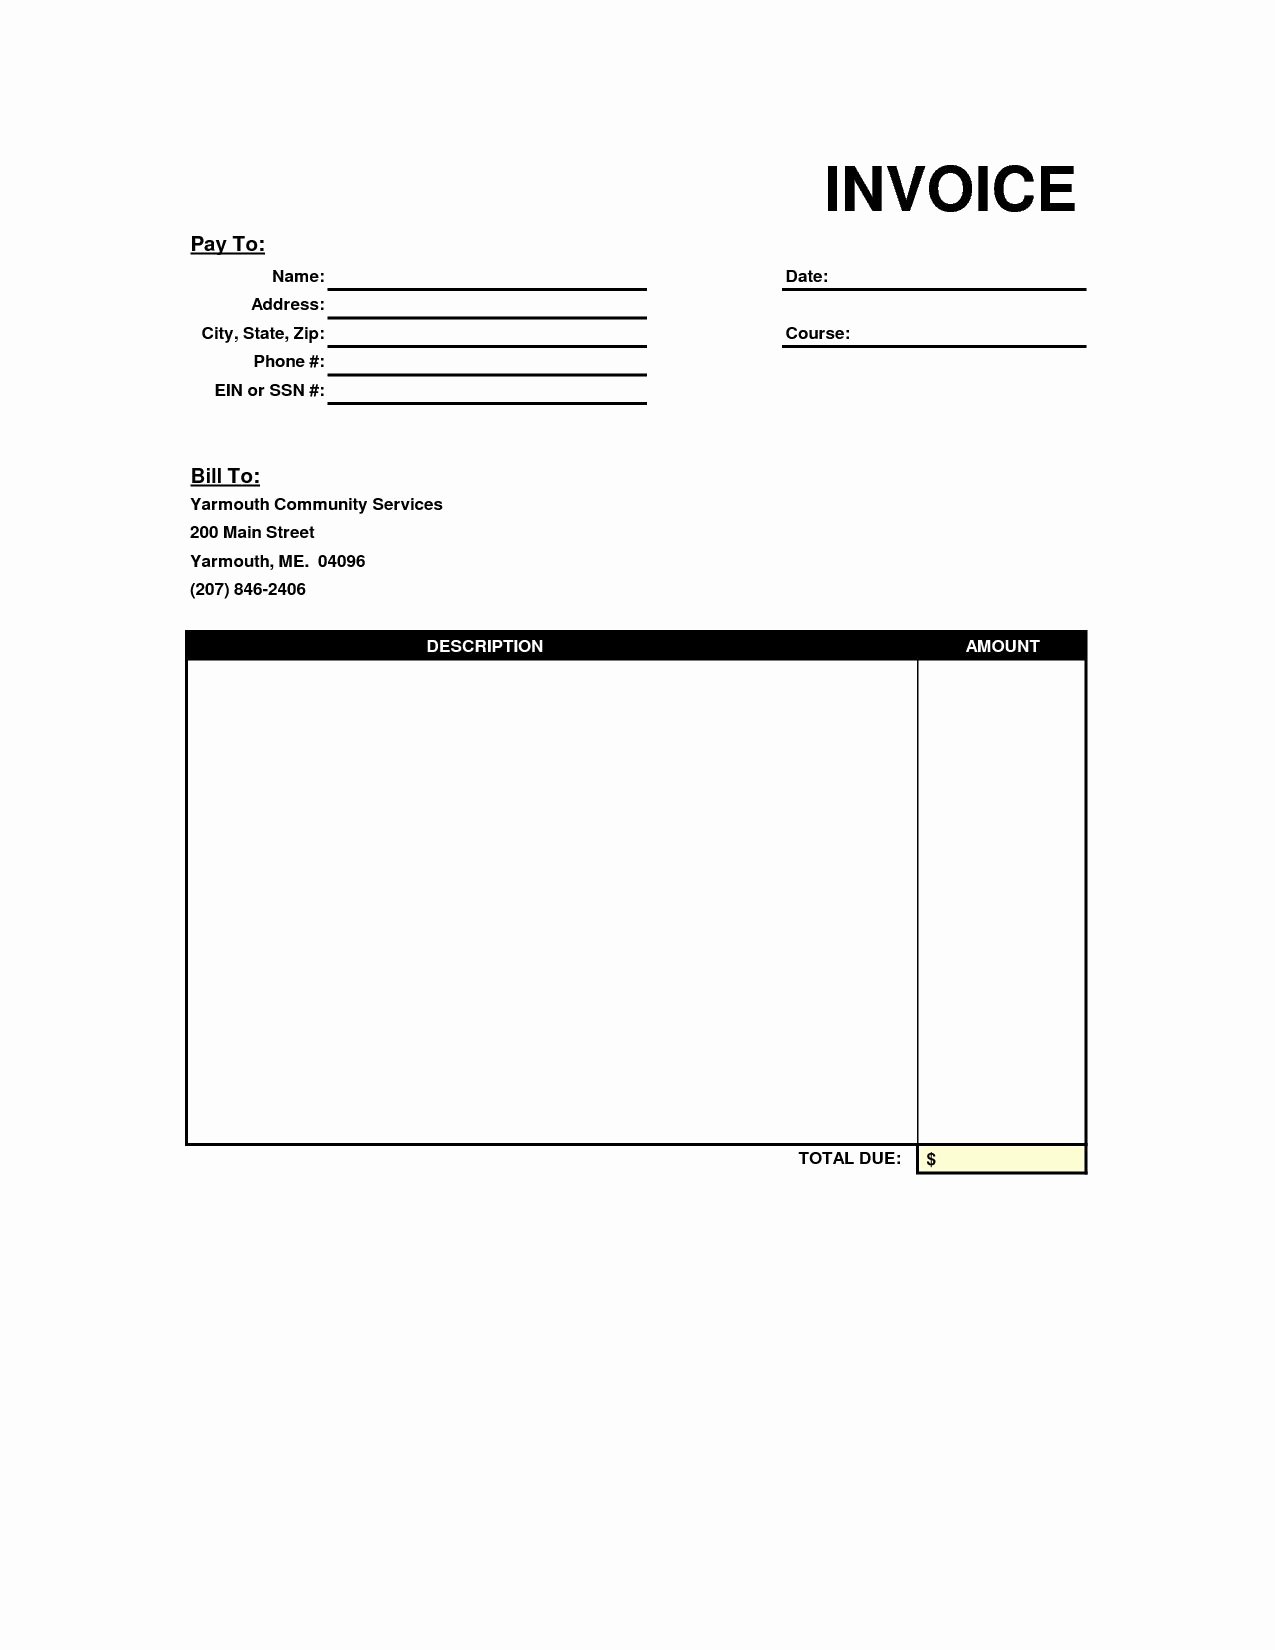 Free Invoice Receipt Template Inspirational Blank Copy Of An Invoice Google Recruiter Resume Copy Of